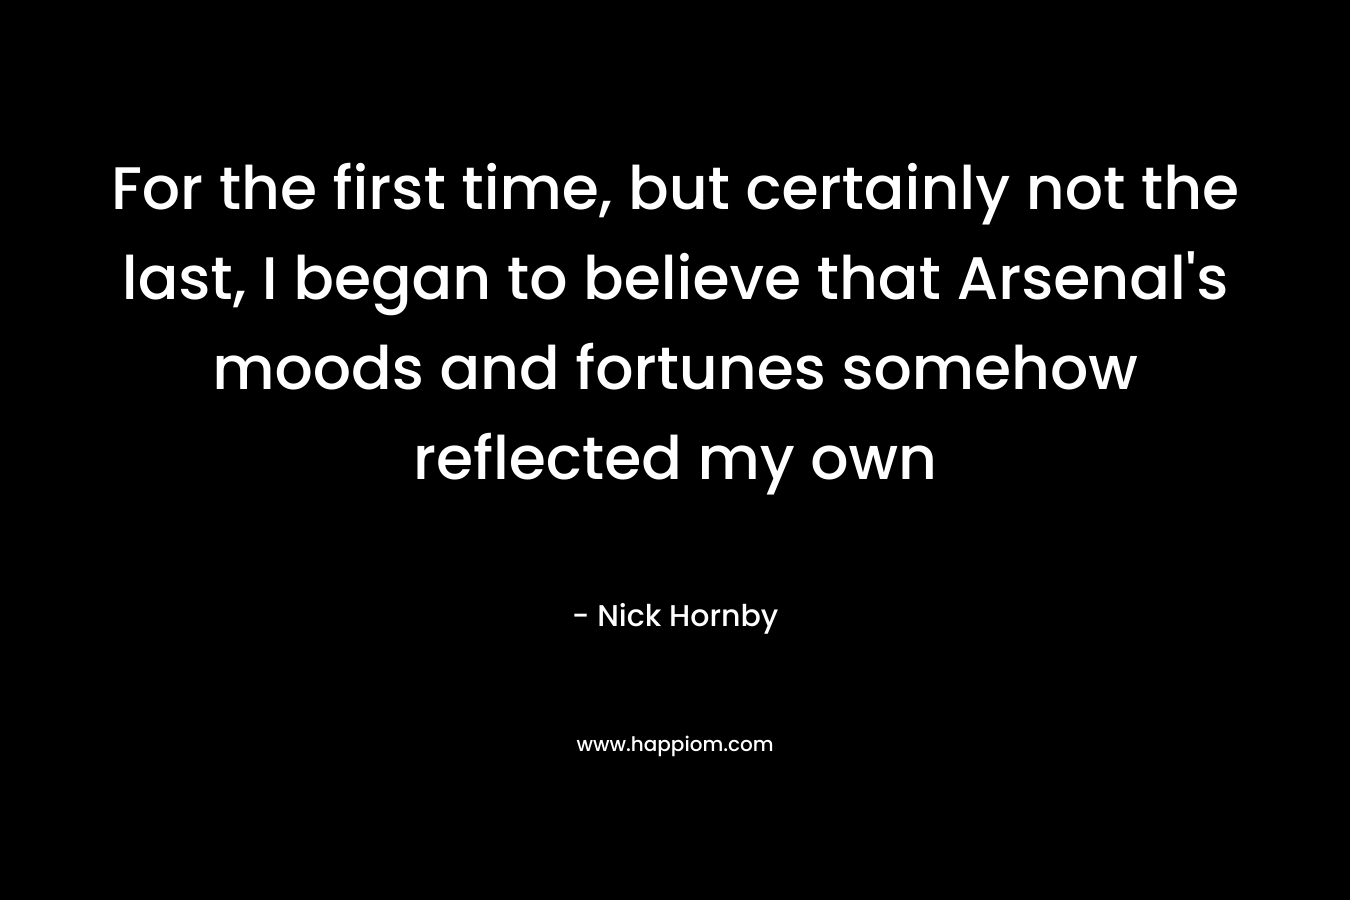 For the first time, but certainly not the last, I began to believe that Arsenal's moods and fortunes somehow reflected my own